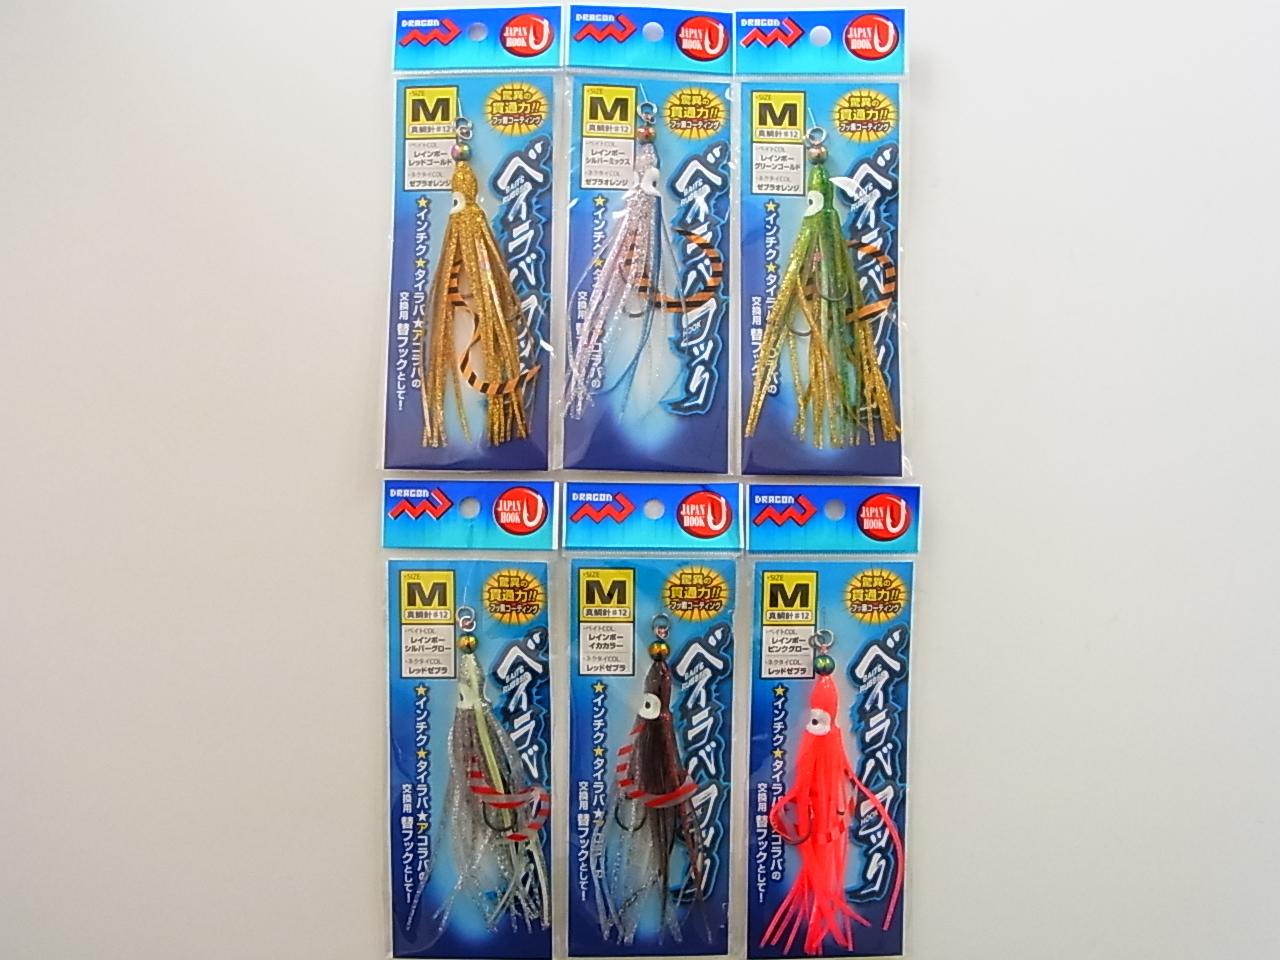  Marushin fishing tackle M seabream for change hook Bay laba hook M seabream seabream 